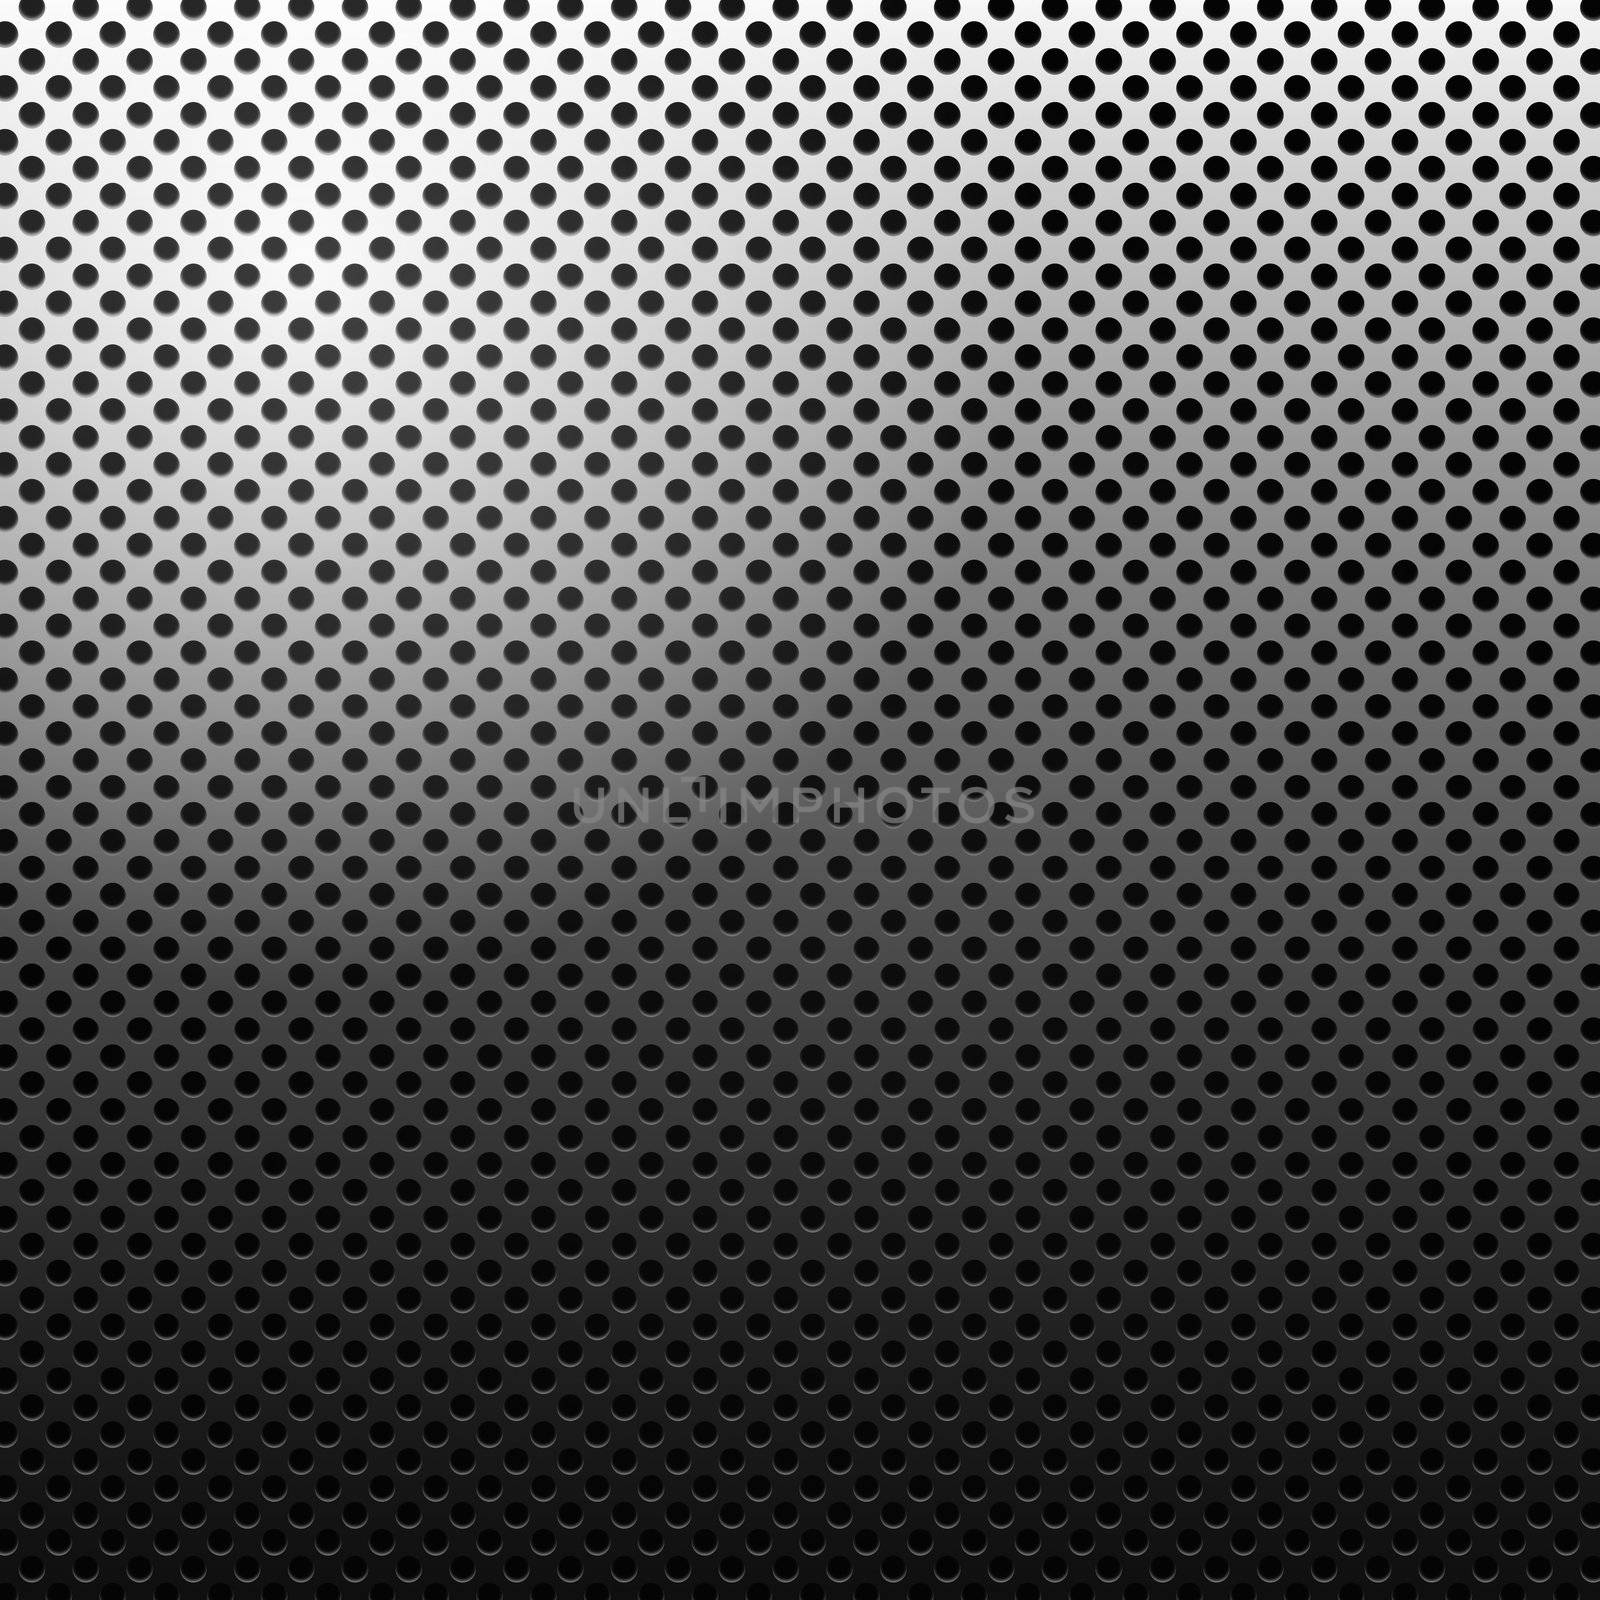 Circle texture metal abstract background with dots